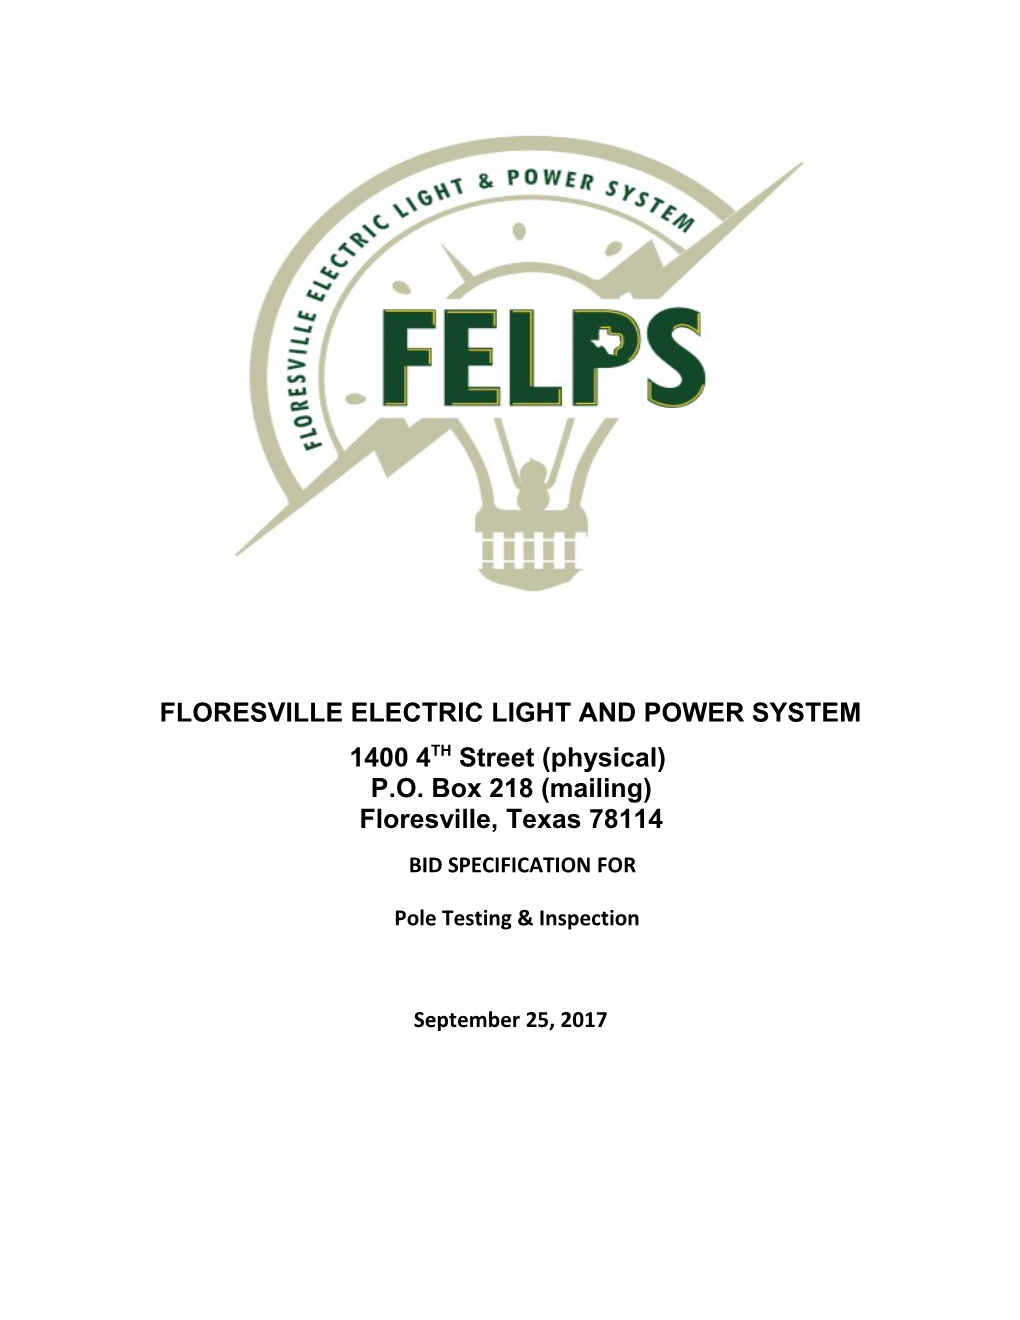 Floresville Electric Light and Power System